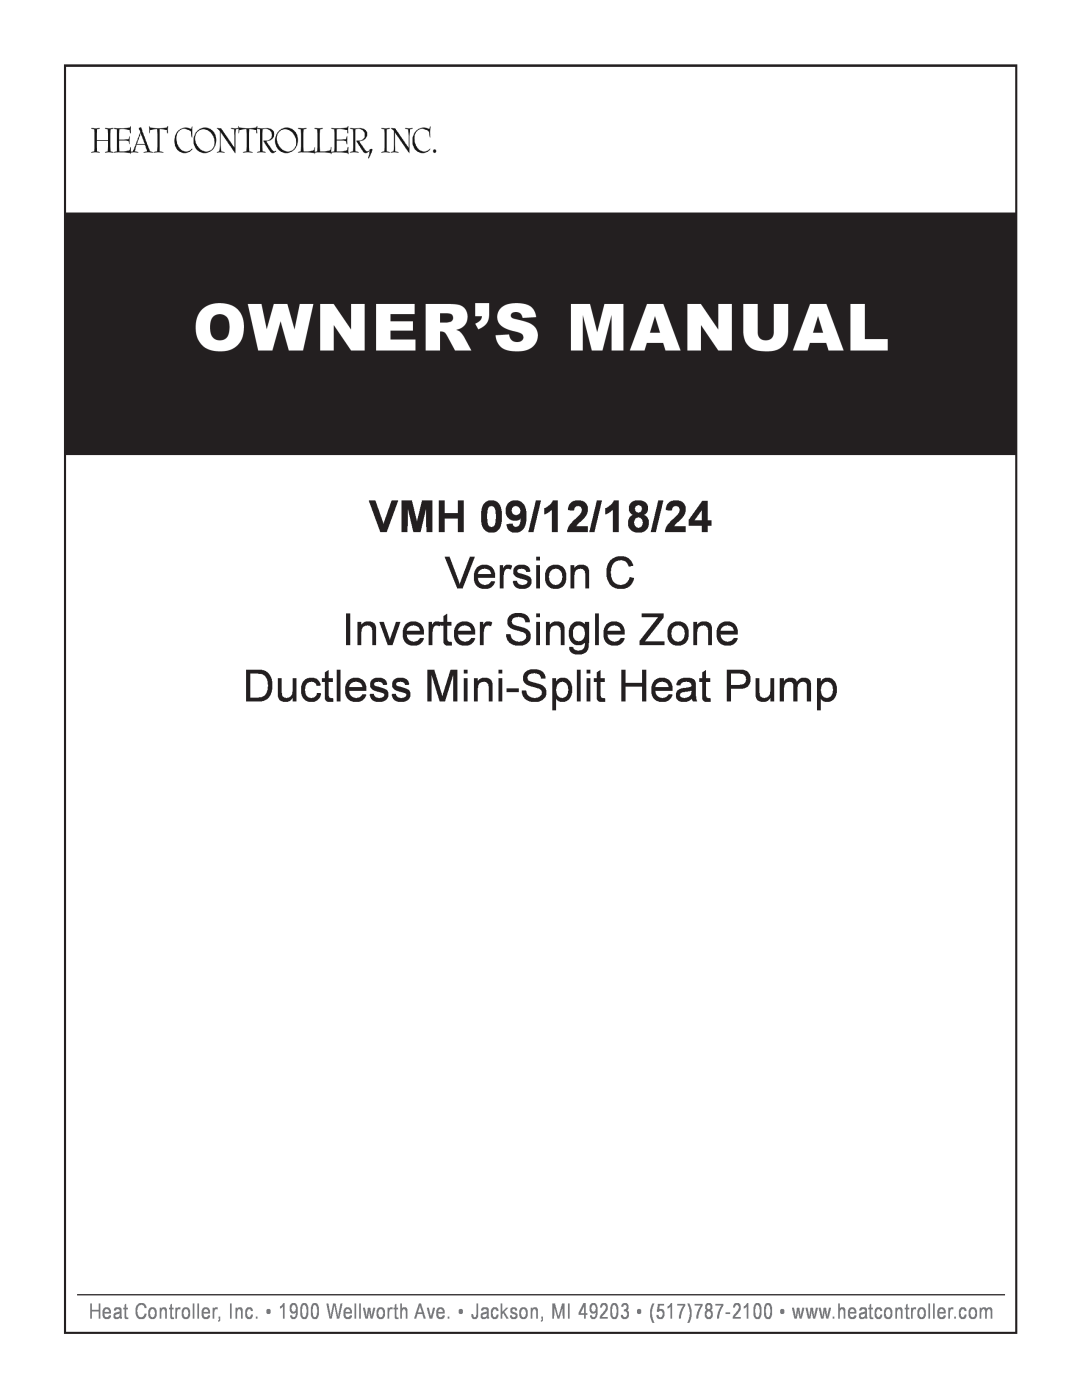 Maytag VMH 09/12/18/24 owner manual Version C Inverter Single Zone, Ductless Mini-SplitHeat Pump 